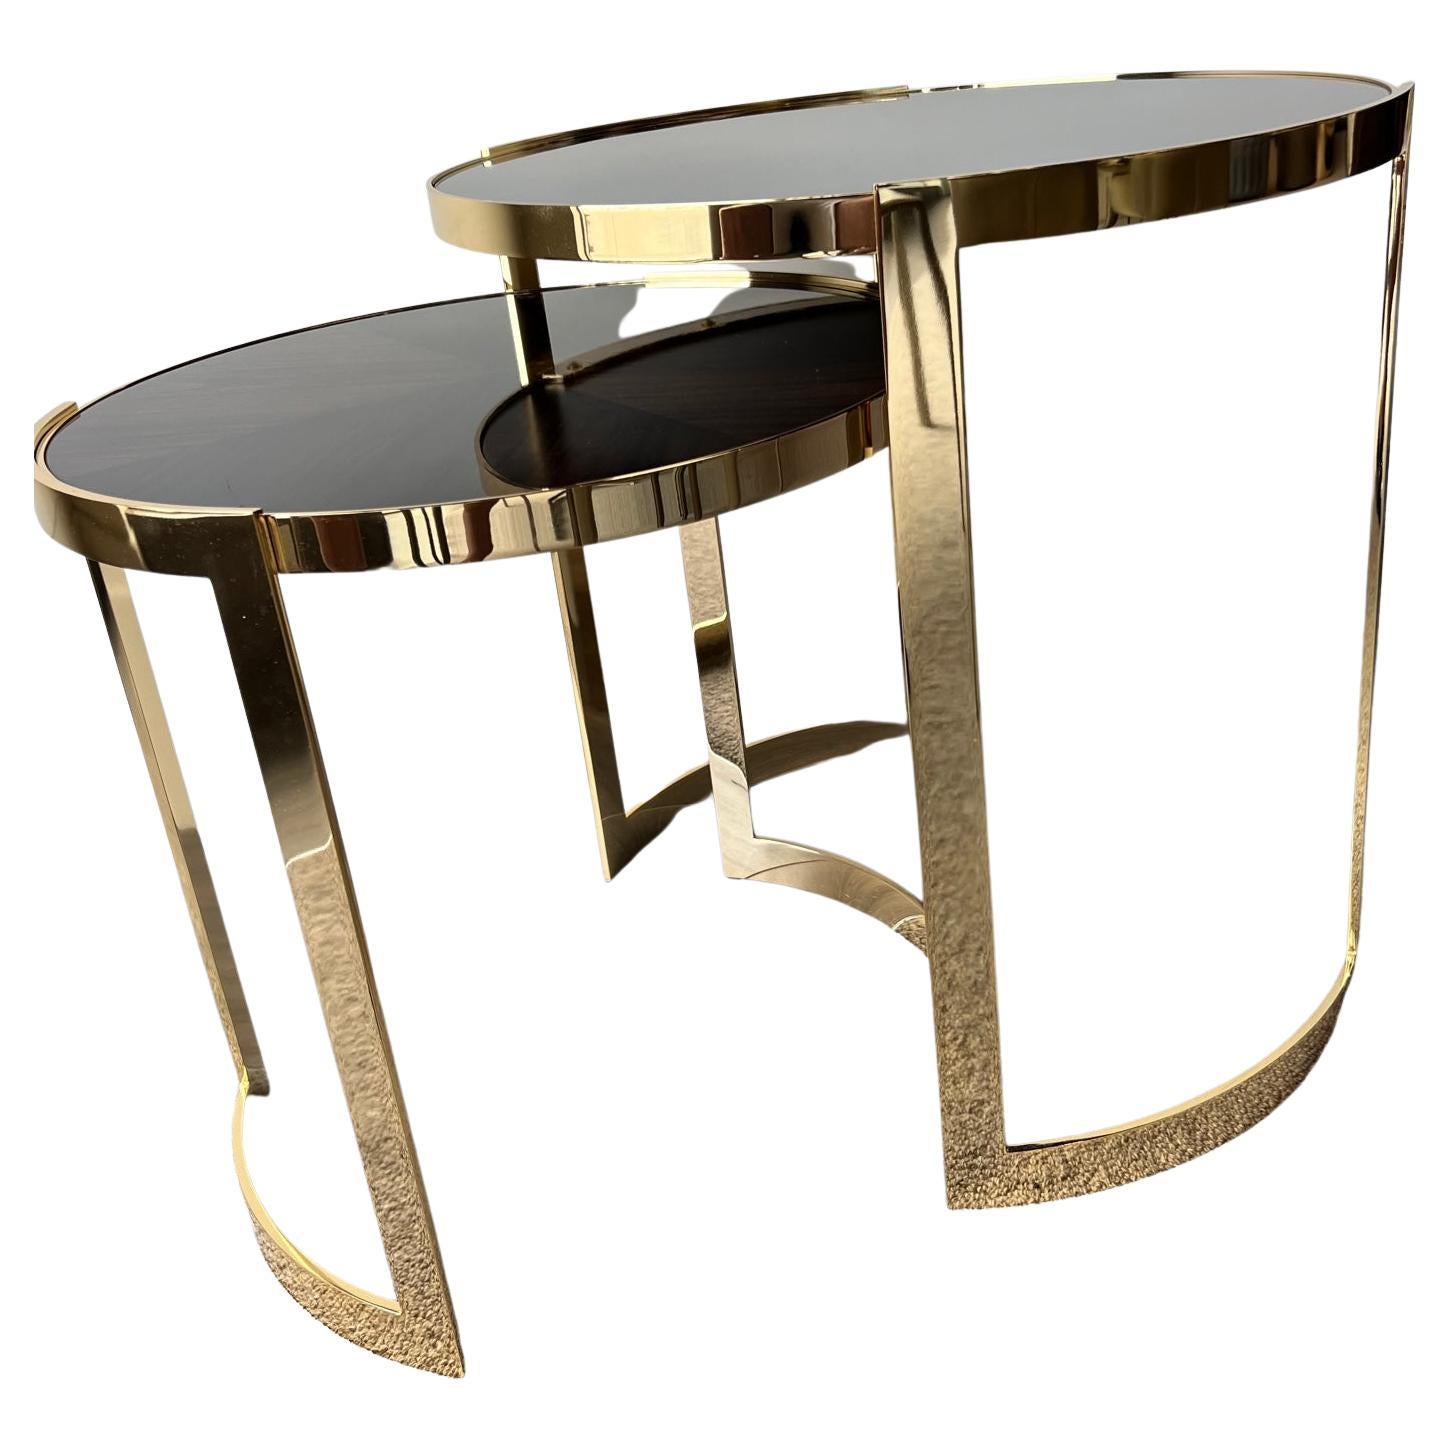 Fendi Casa Rosewood and brass nesting tables